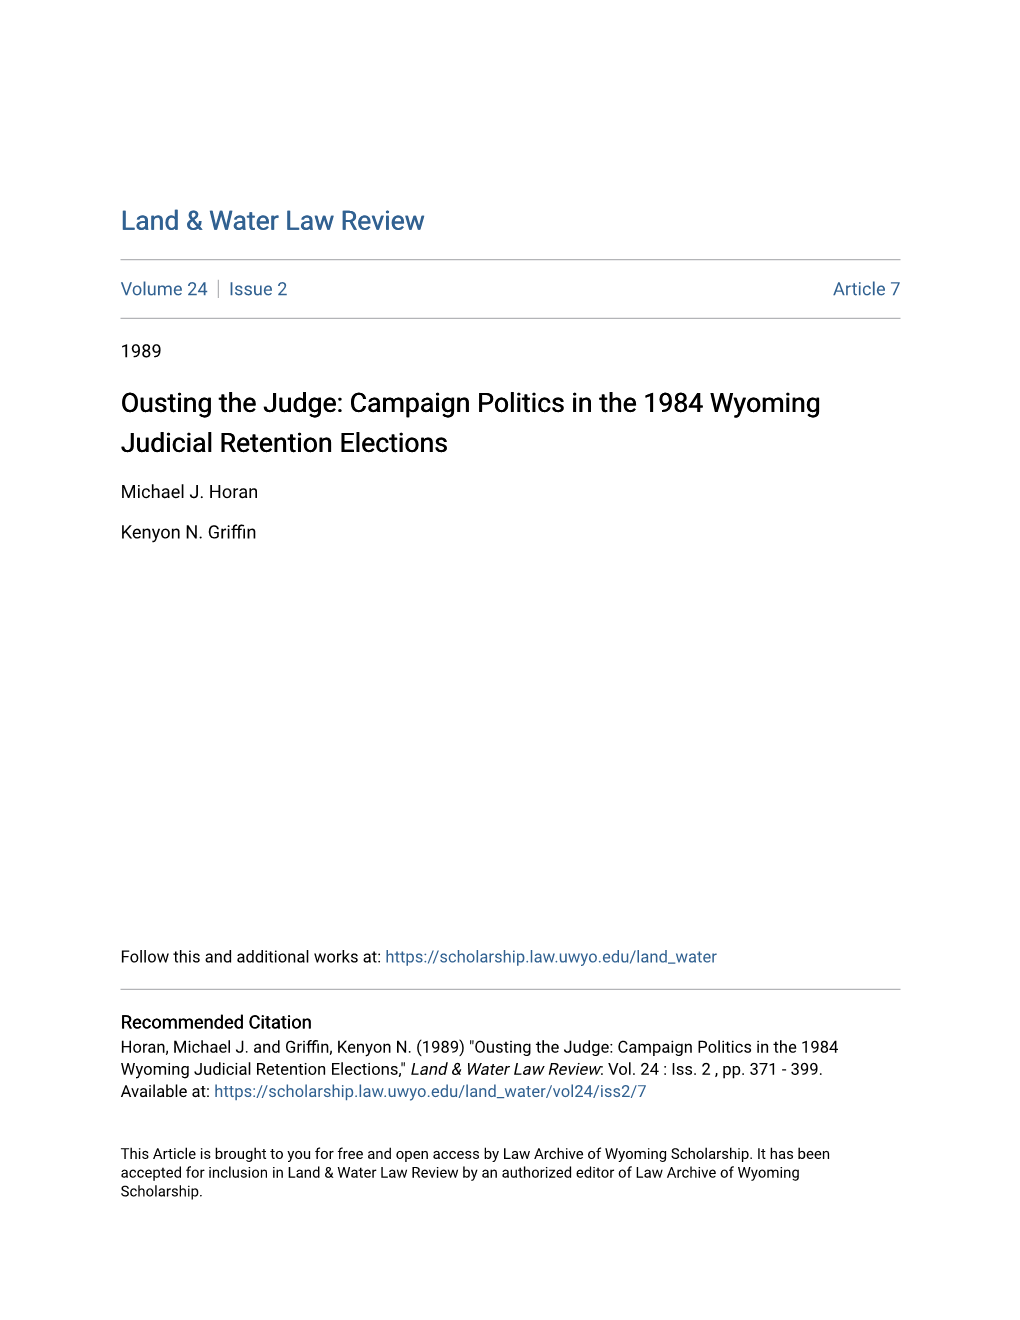 Ousting the Judge: Campaign Politics in the 1984 Wyoming Judicial Retention Elections